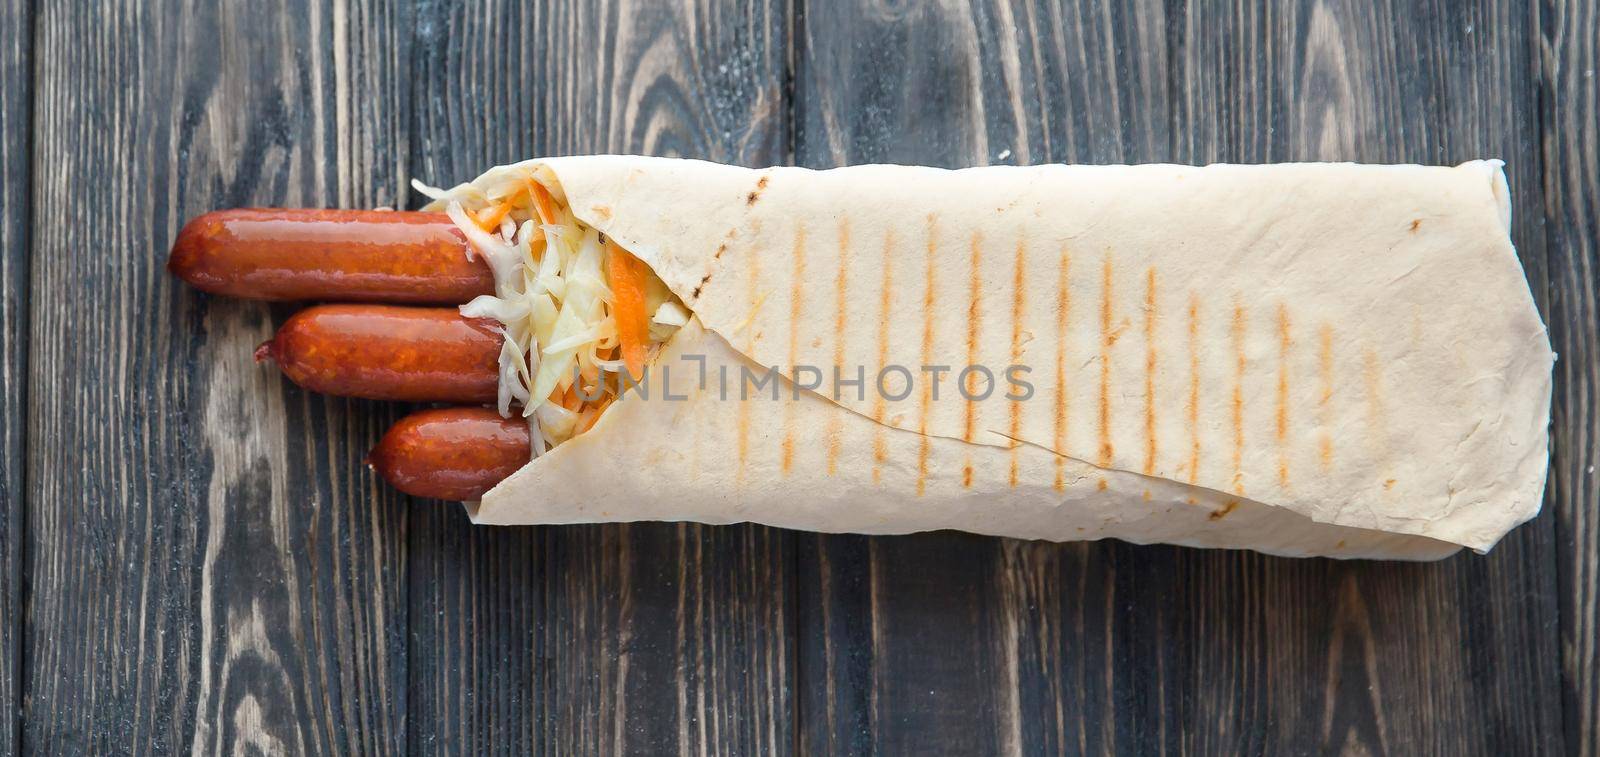 smoked sausage in pita bread on a dark wooden background.photo with copy space.